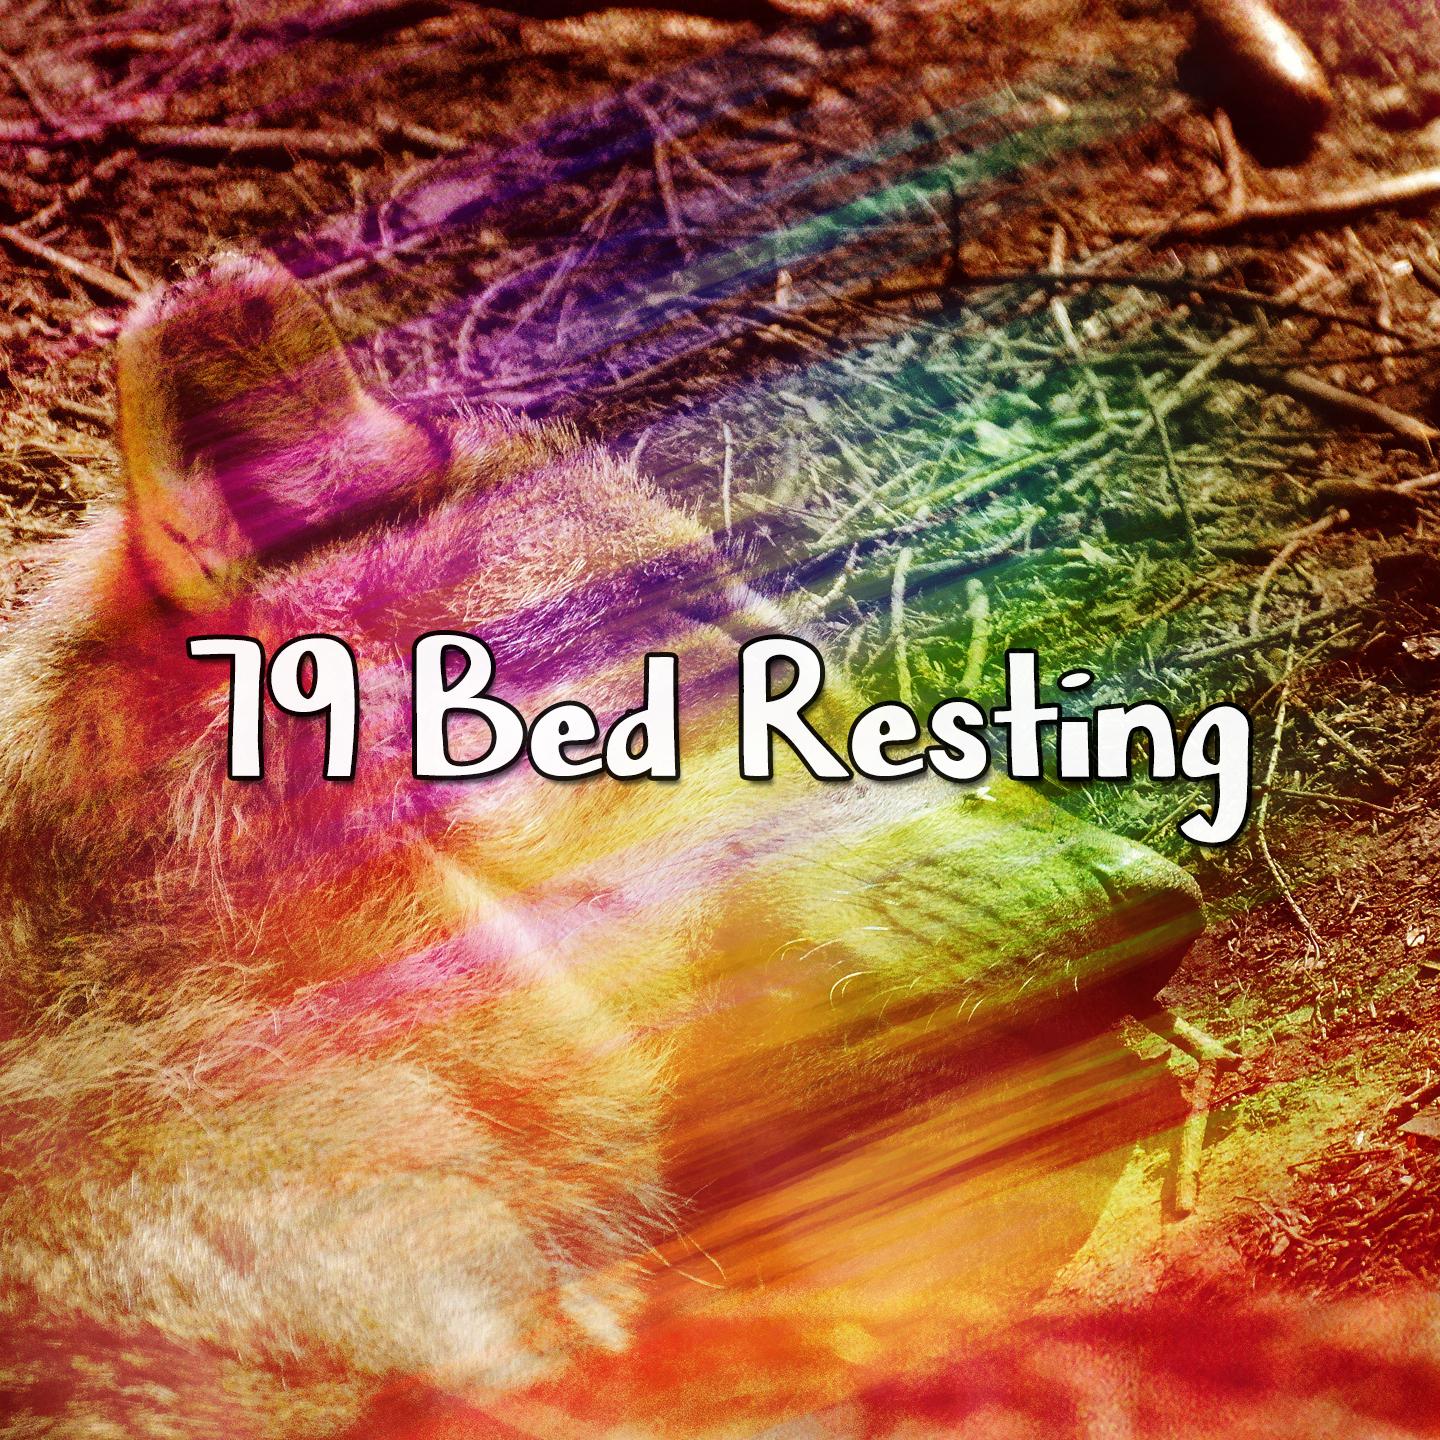 79 Bed Resting